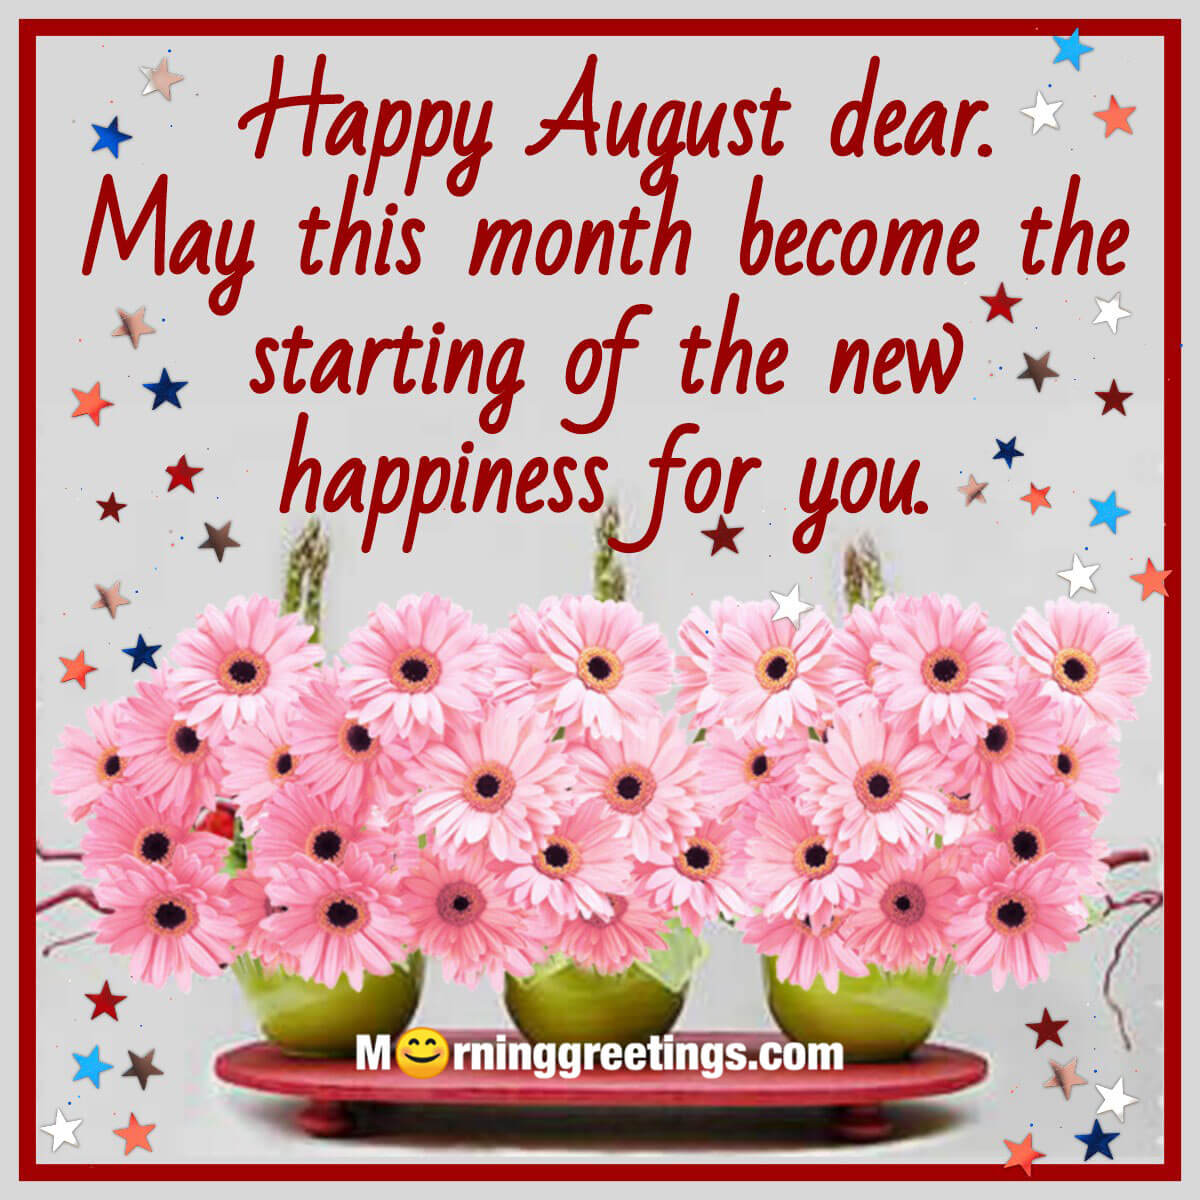 Happy August Dear Wishes